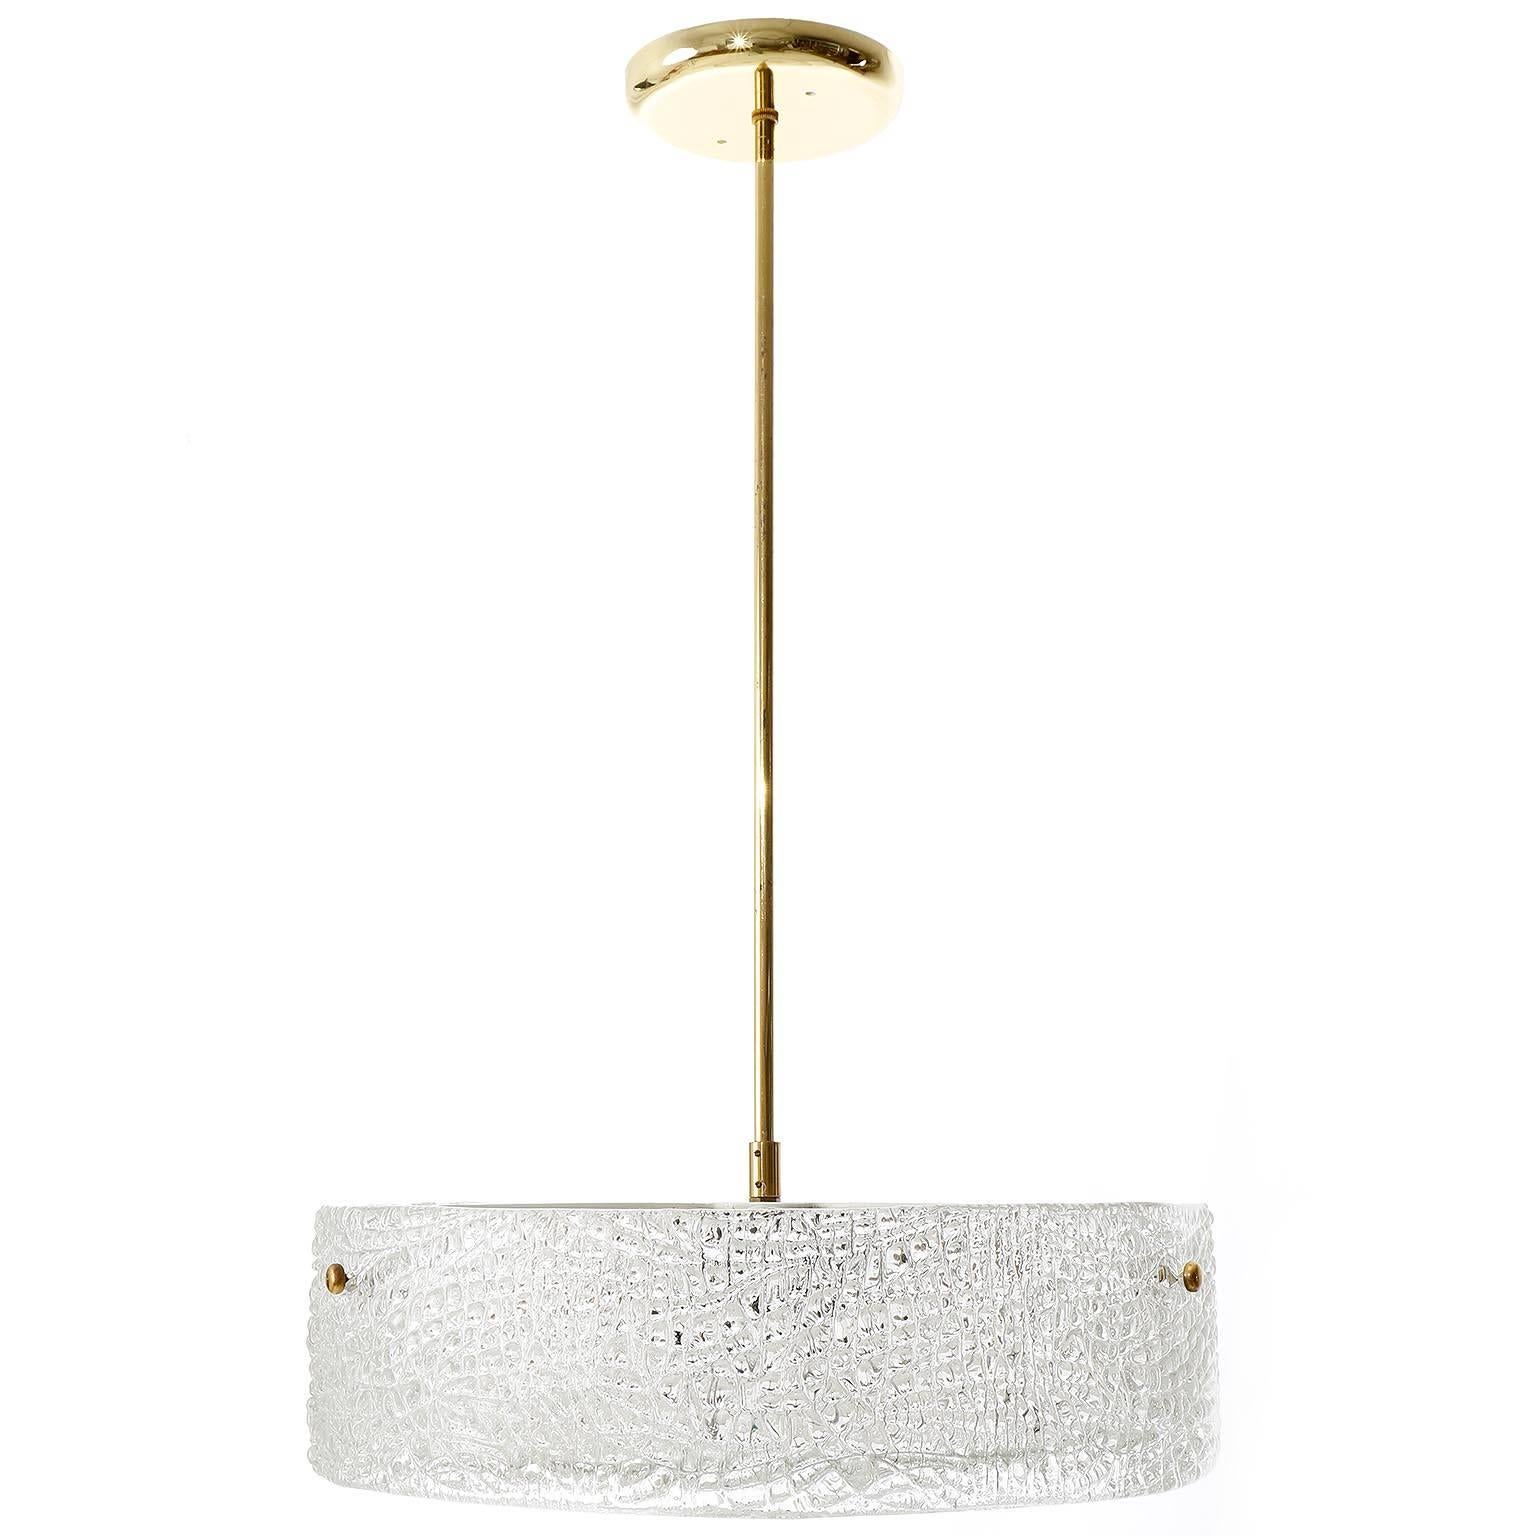 A beautiful textured glass and brass light fixture by J.T. Kalmar, Vienna, manufactured in midcentury, circa 1960 (late 1950s or early 1960s).
A round glass ring is mounted with three brass bolts on a white enameled metal frame. A textured glass